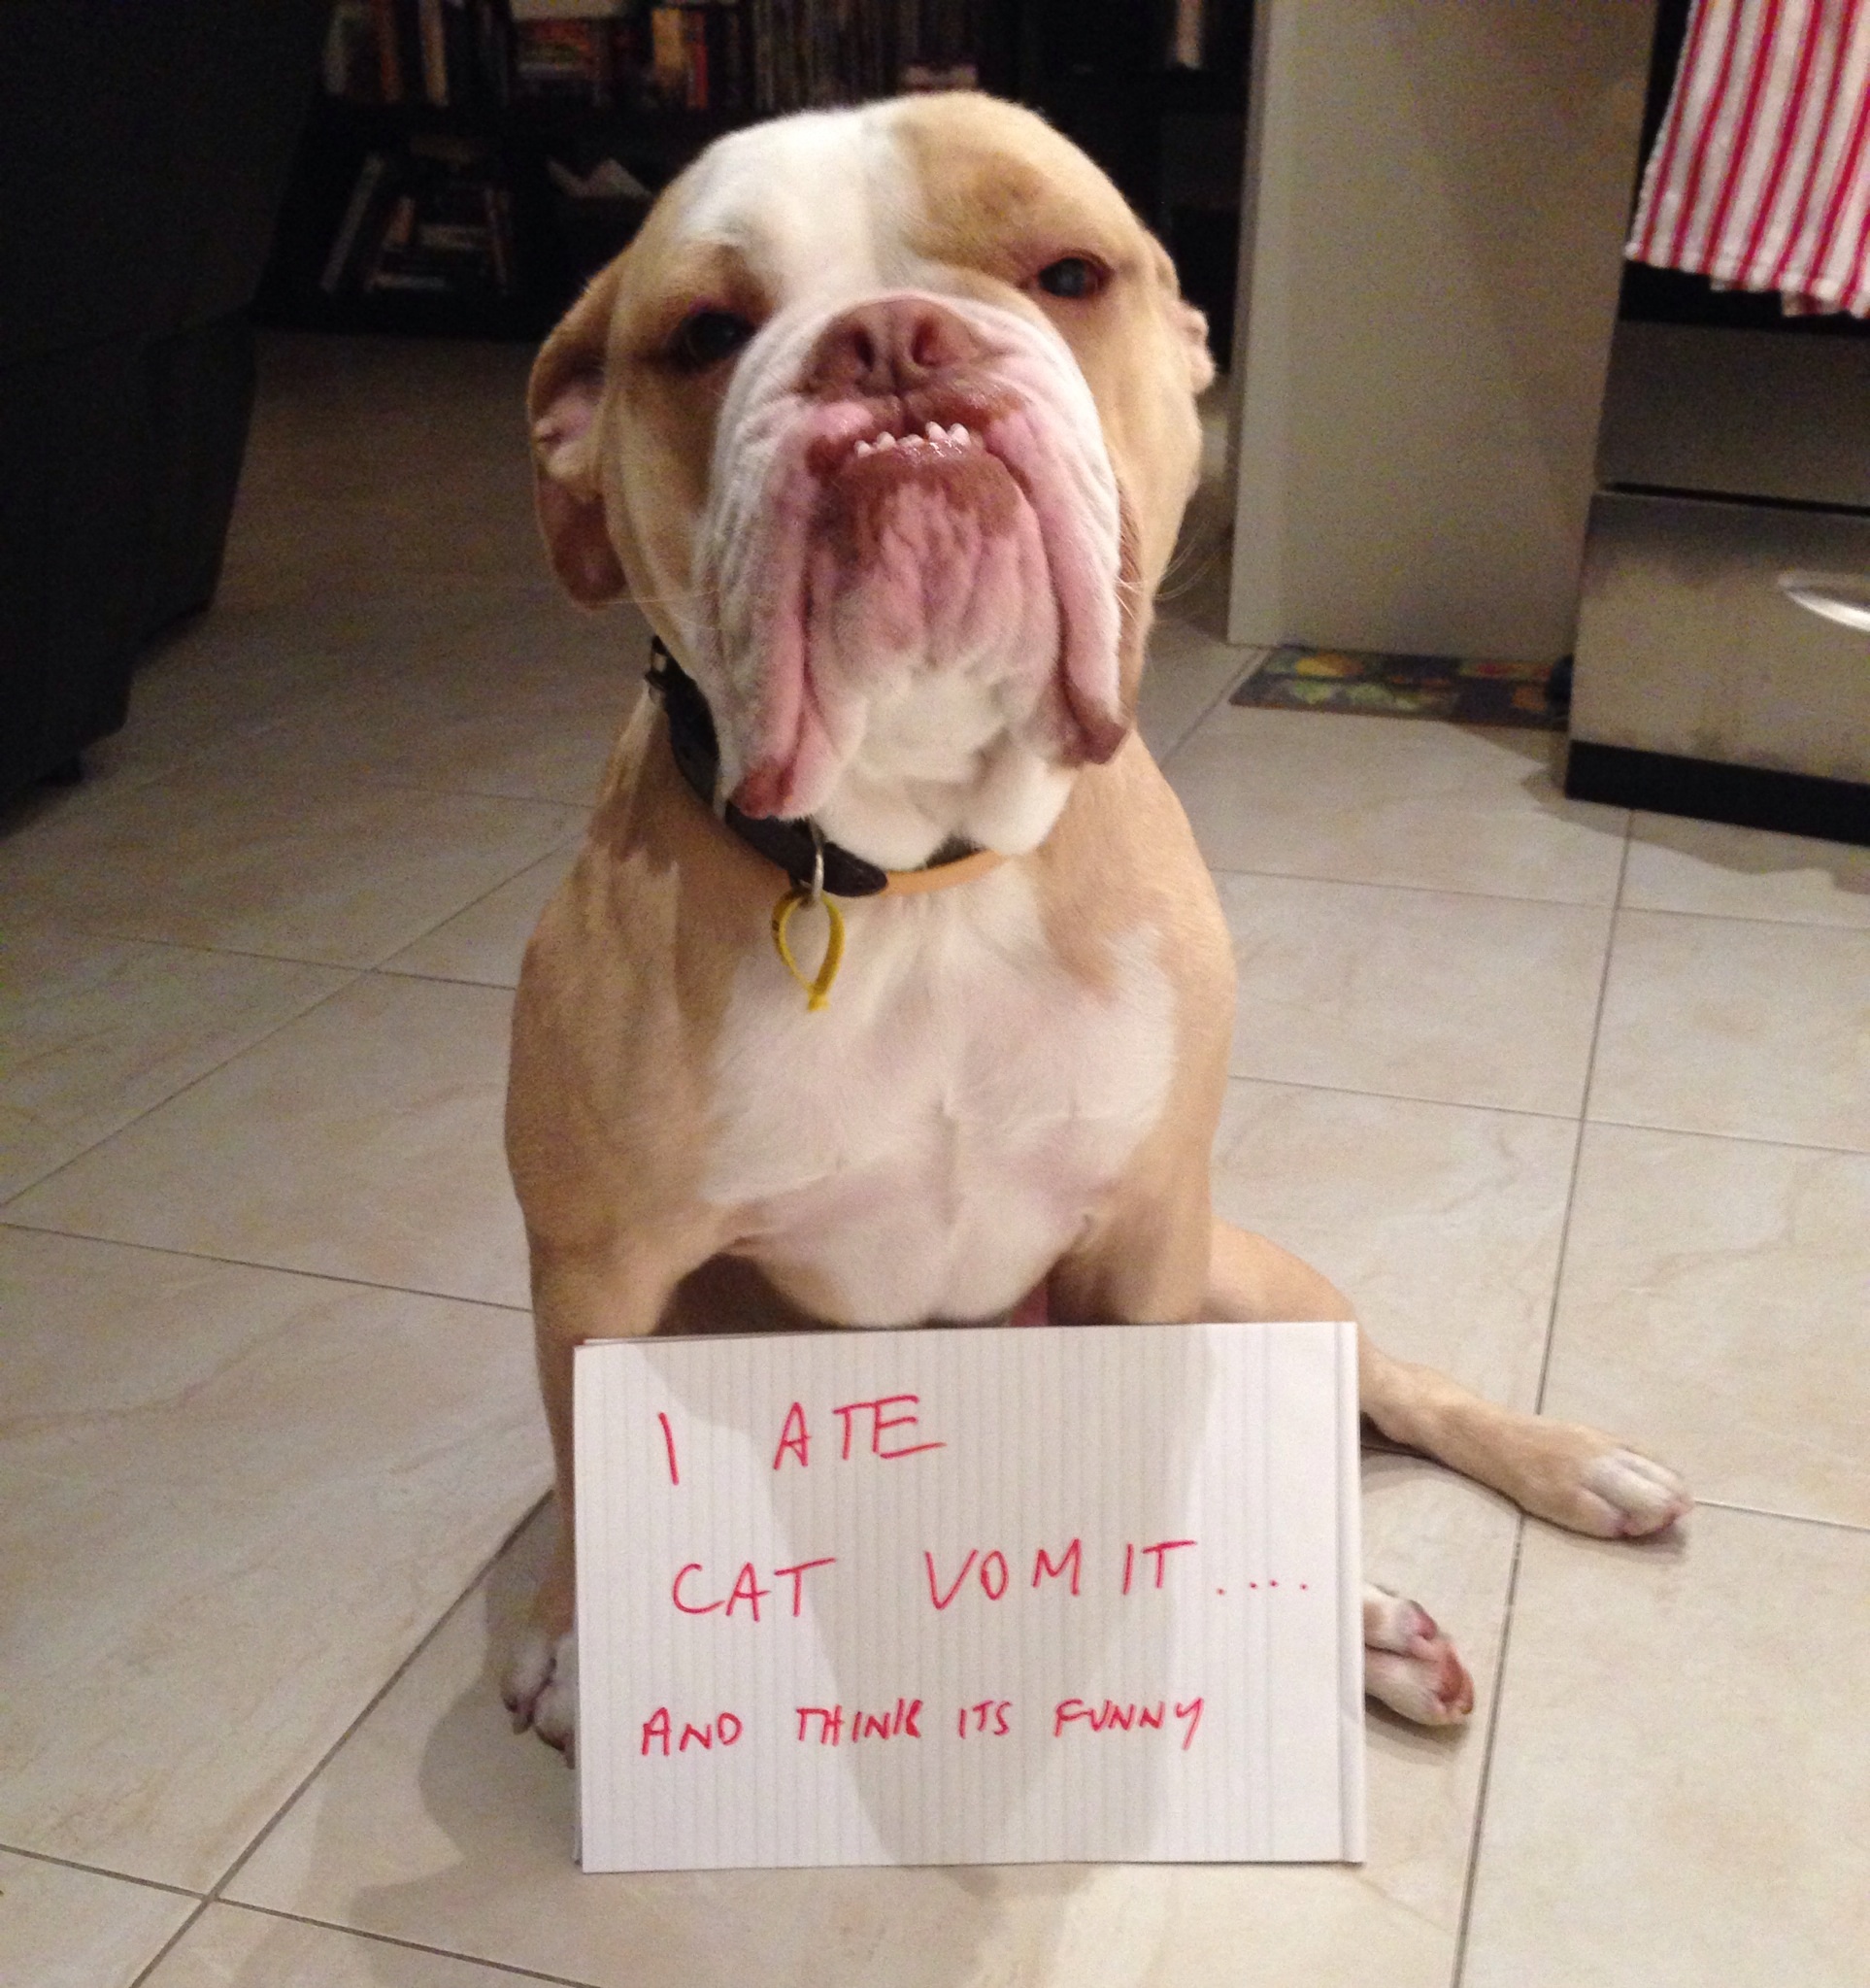 Clean up crew needed in aisle 26. - Dogshaming